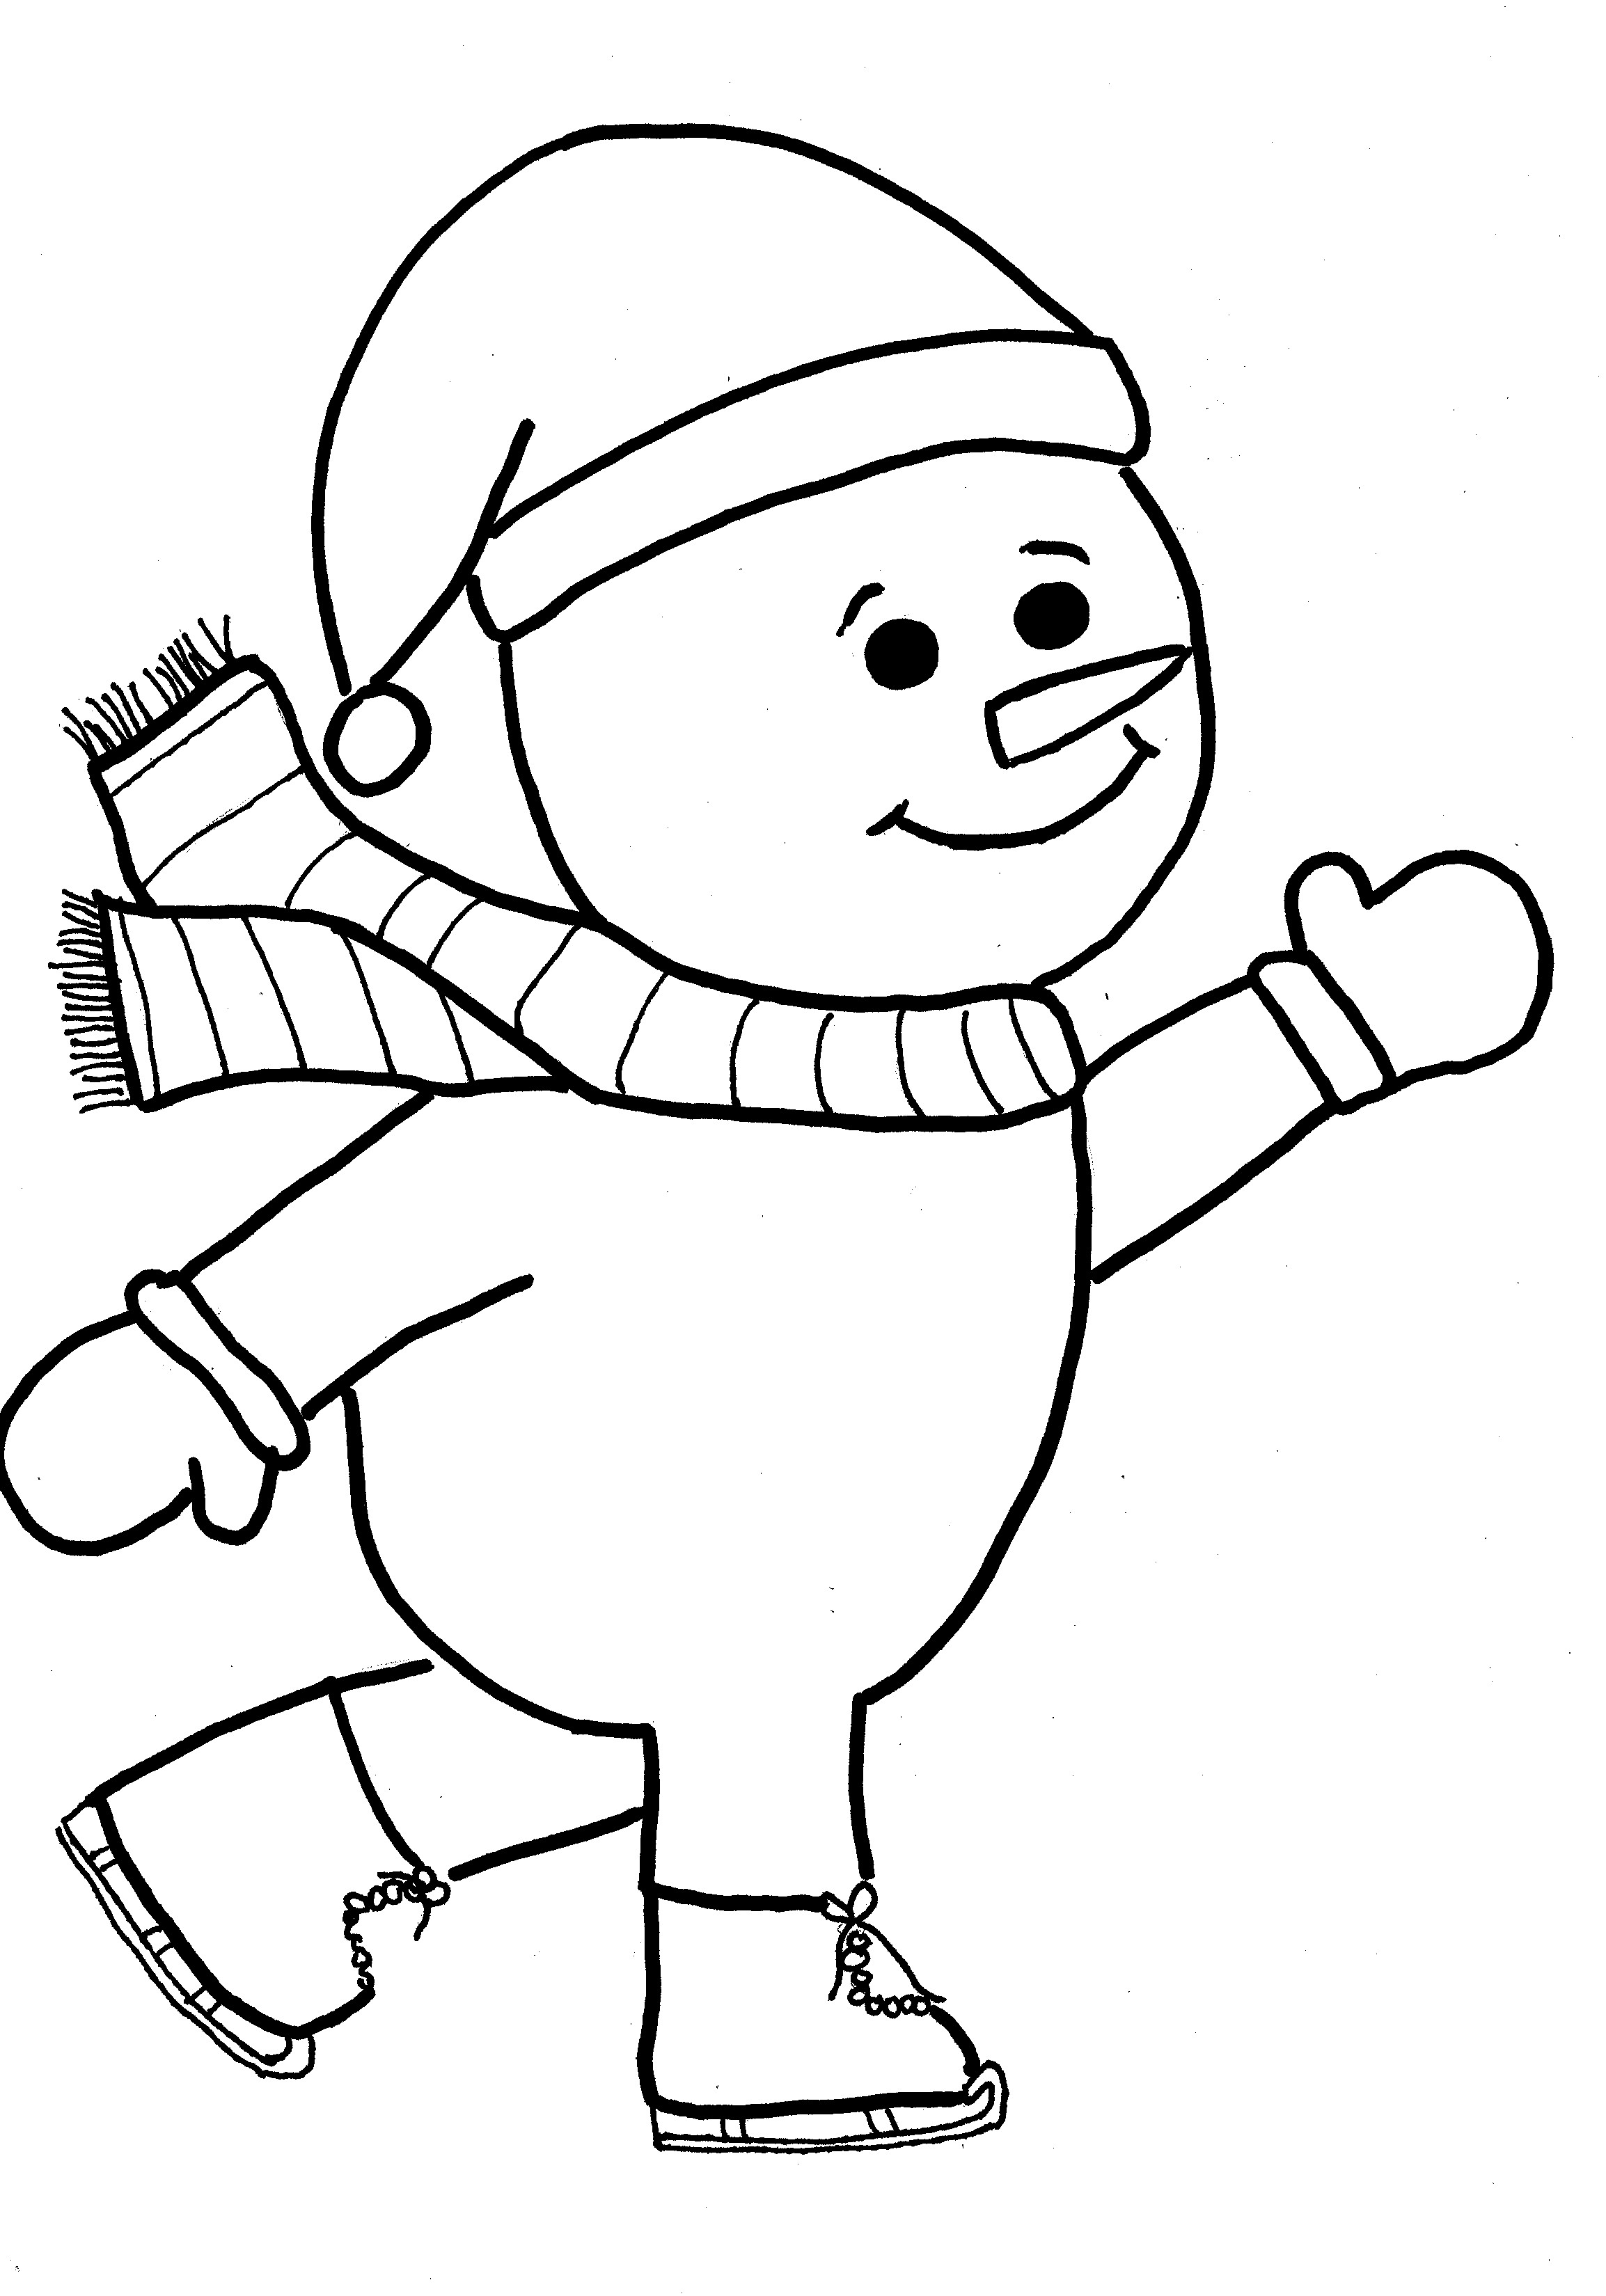 Coloring Sheets For Kids But Snowman
 Free Printable Snowman Coloring Pages For Kids